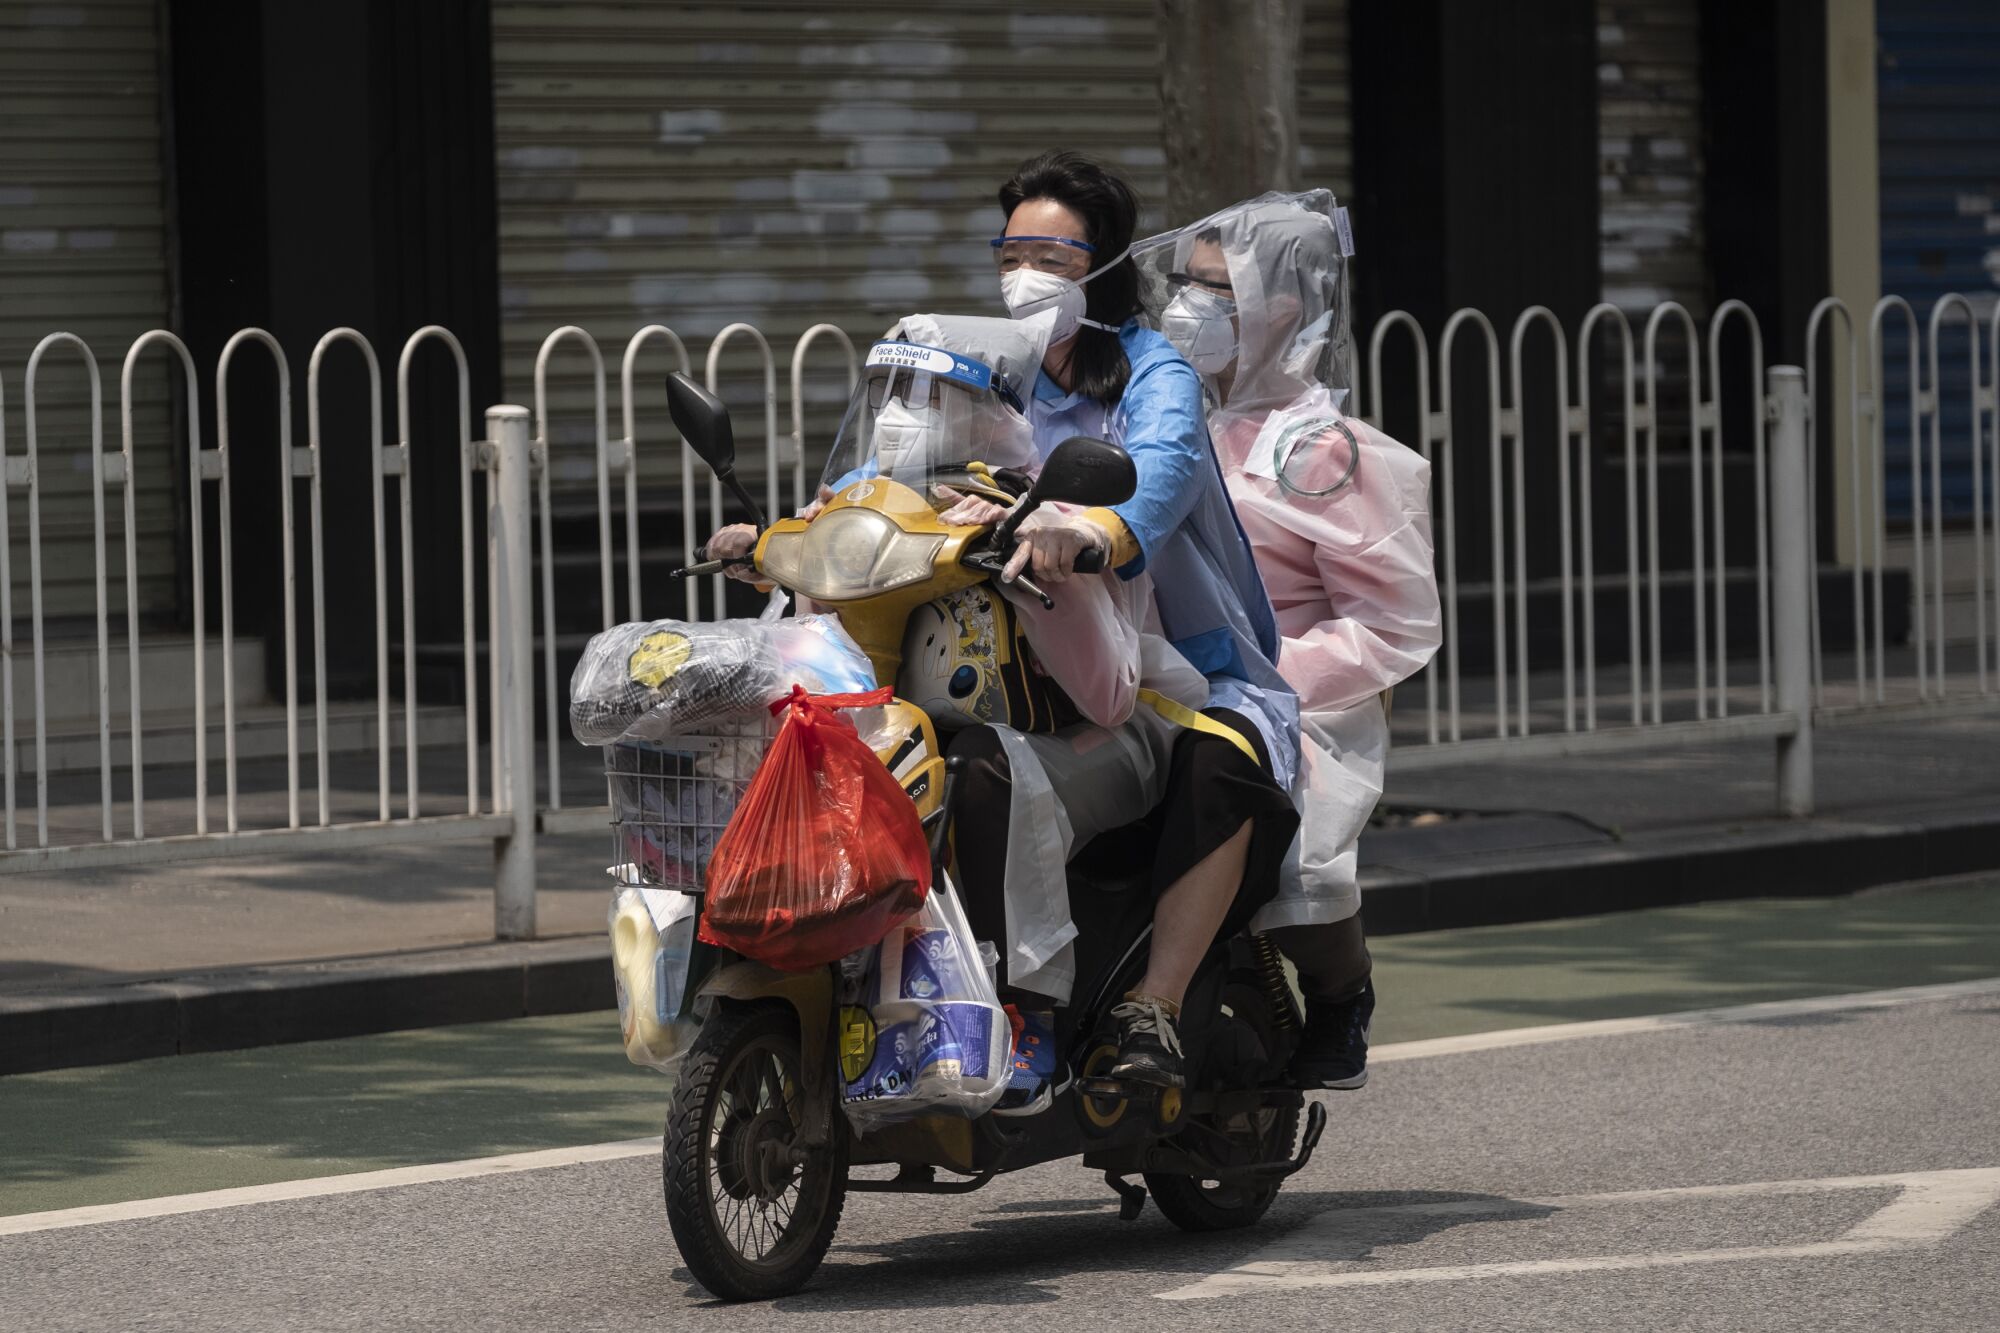 Wuhan's lockdown has lifted, but anxieties about the coronavirus remain. Travelers, above, take precautions while heading to the grocery store.